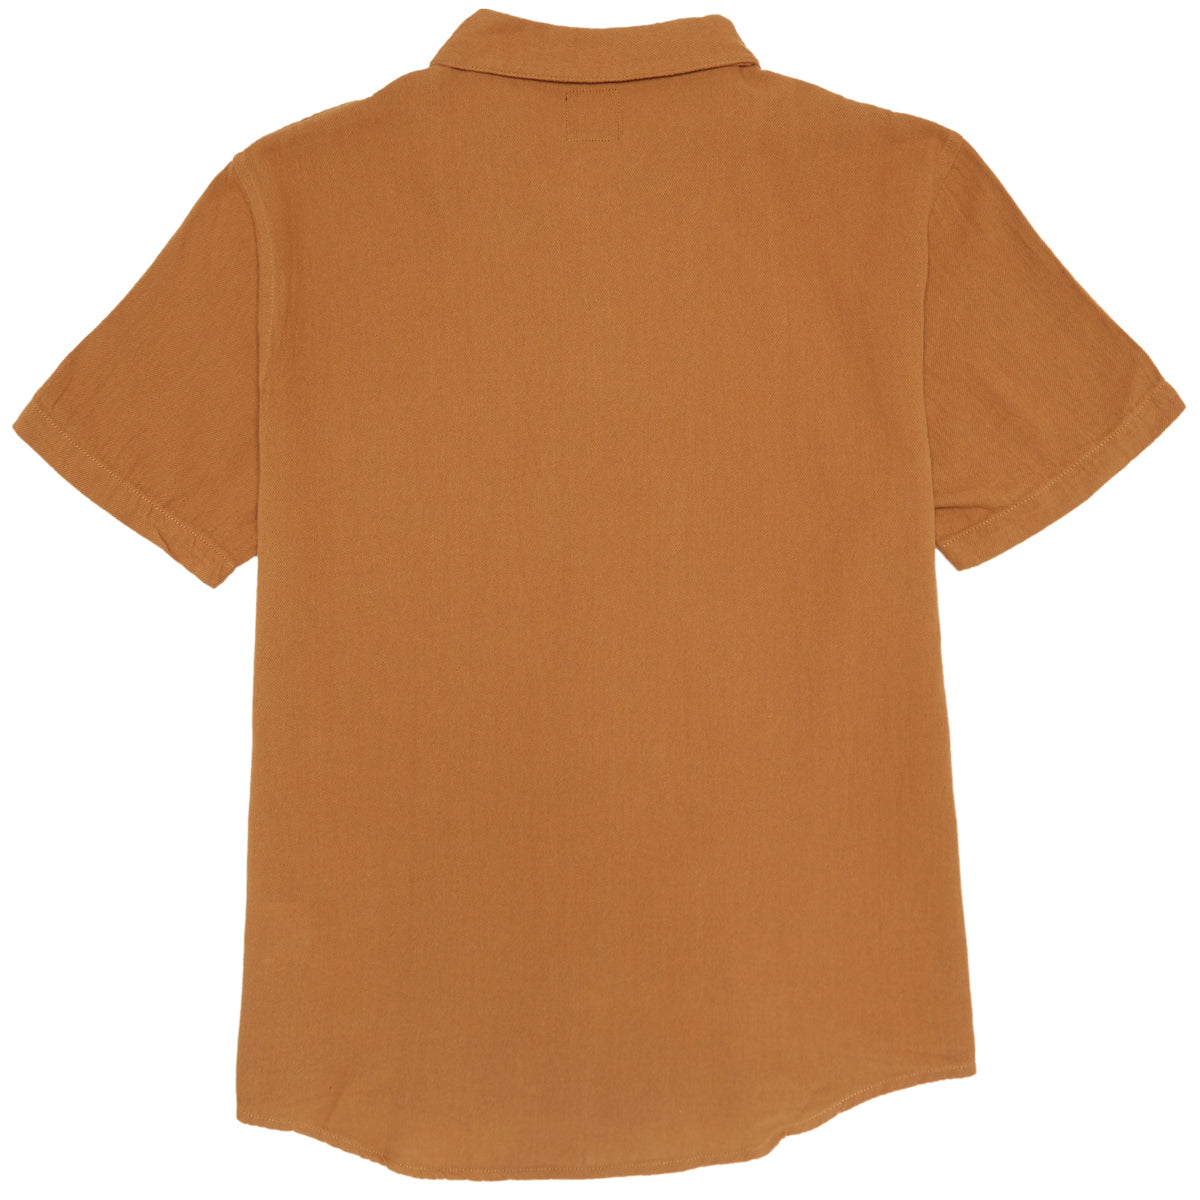 RVCA Day Shift Solid Shirt - Camel image 2